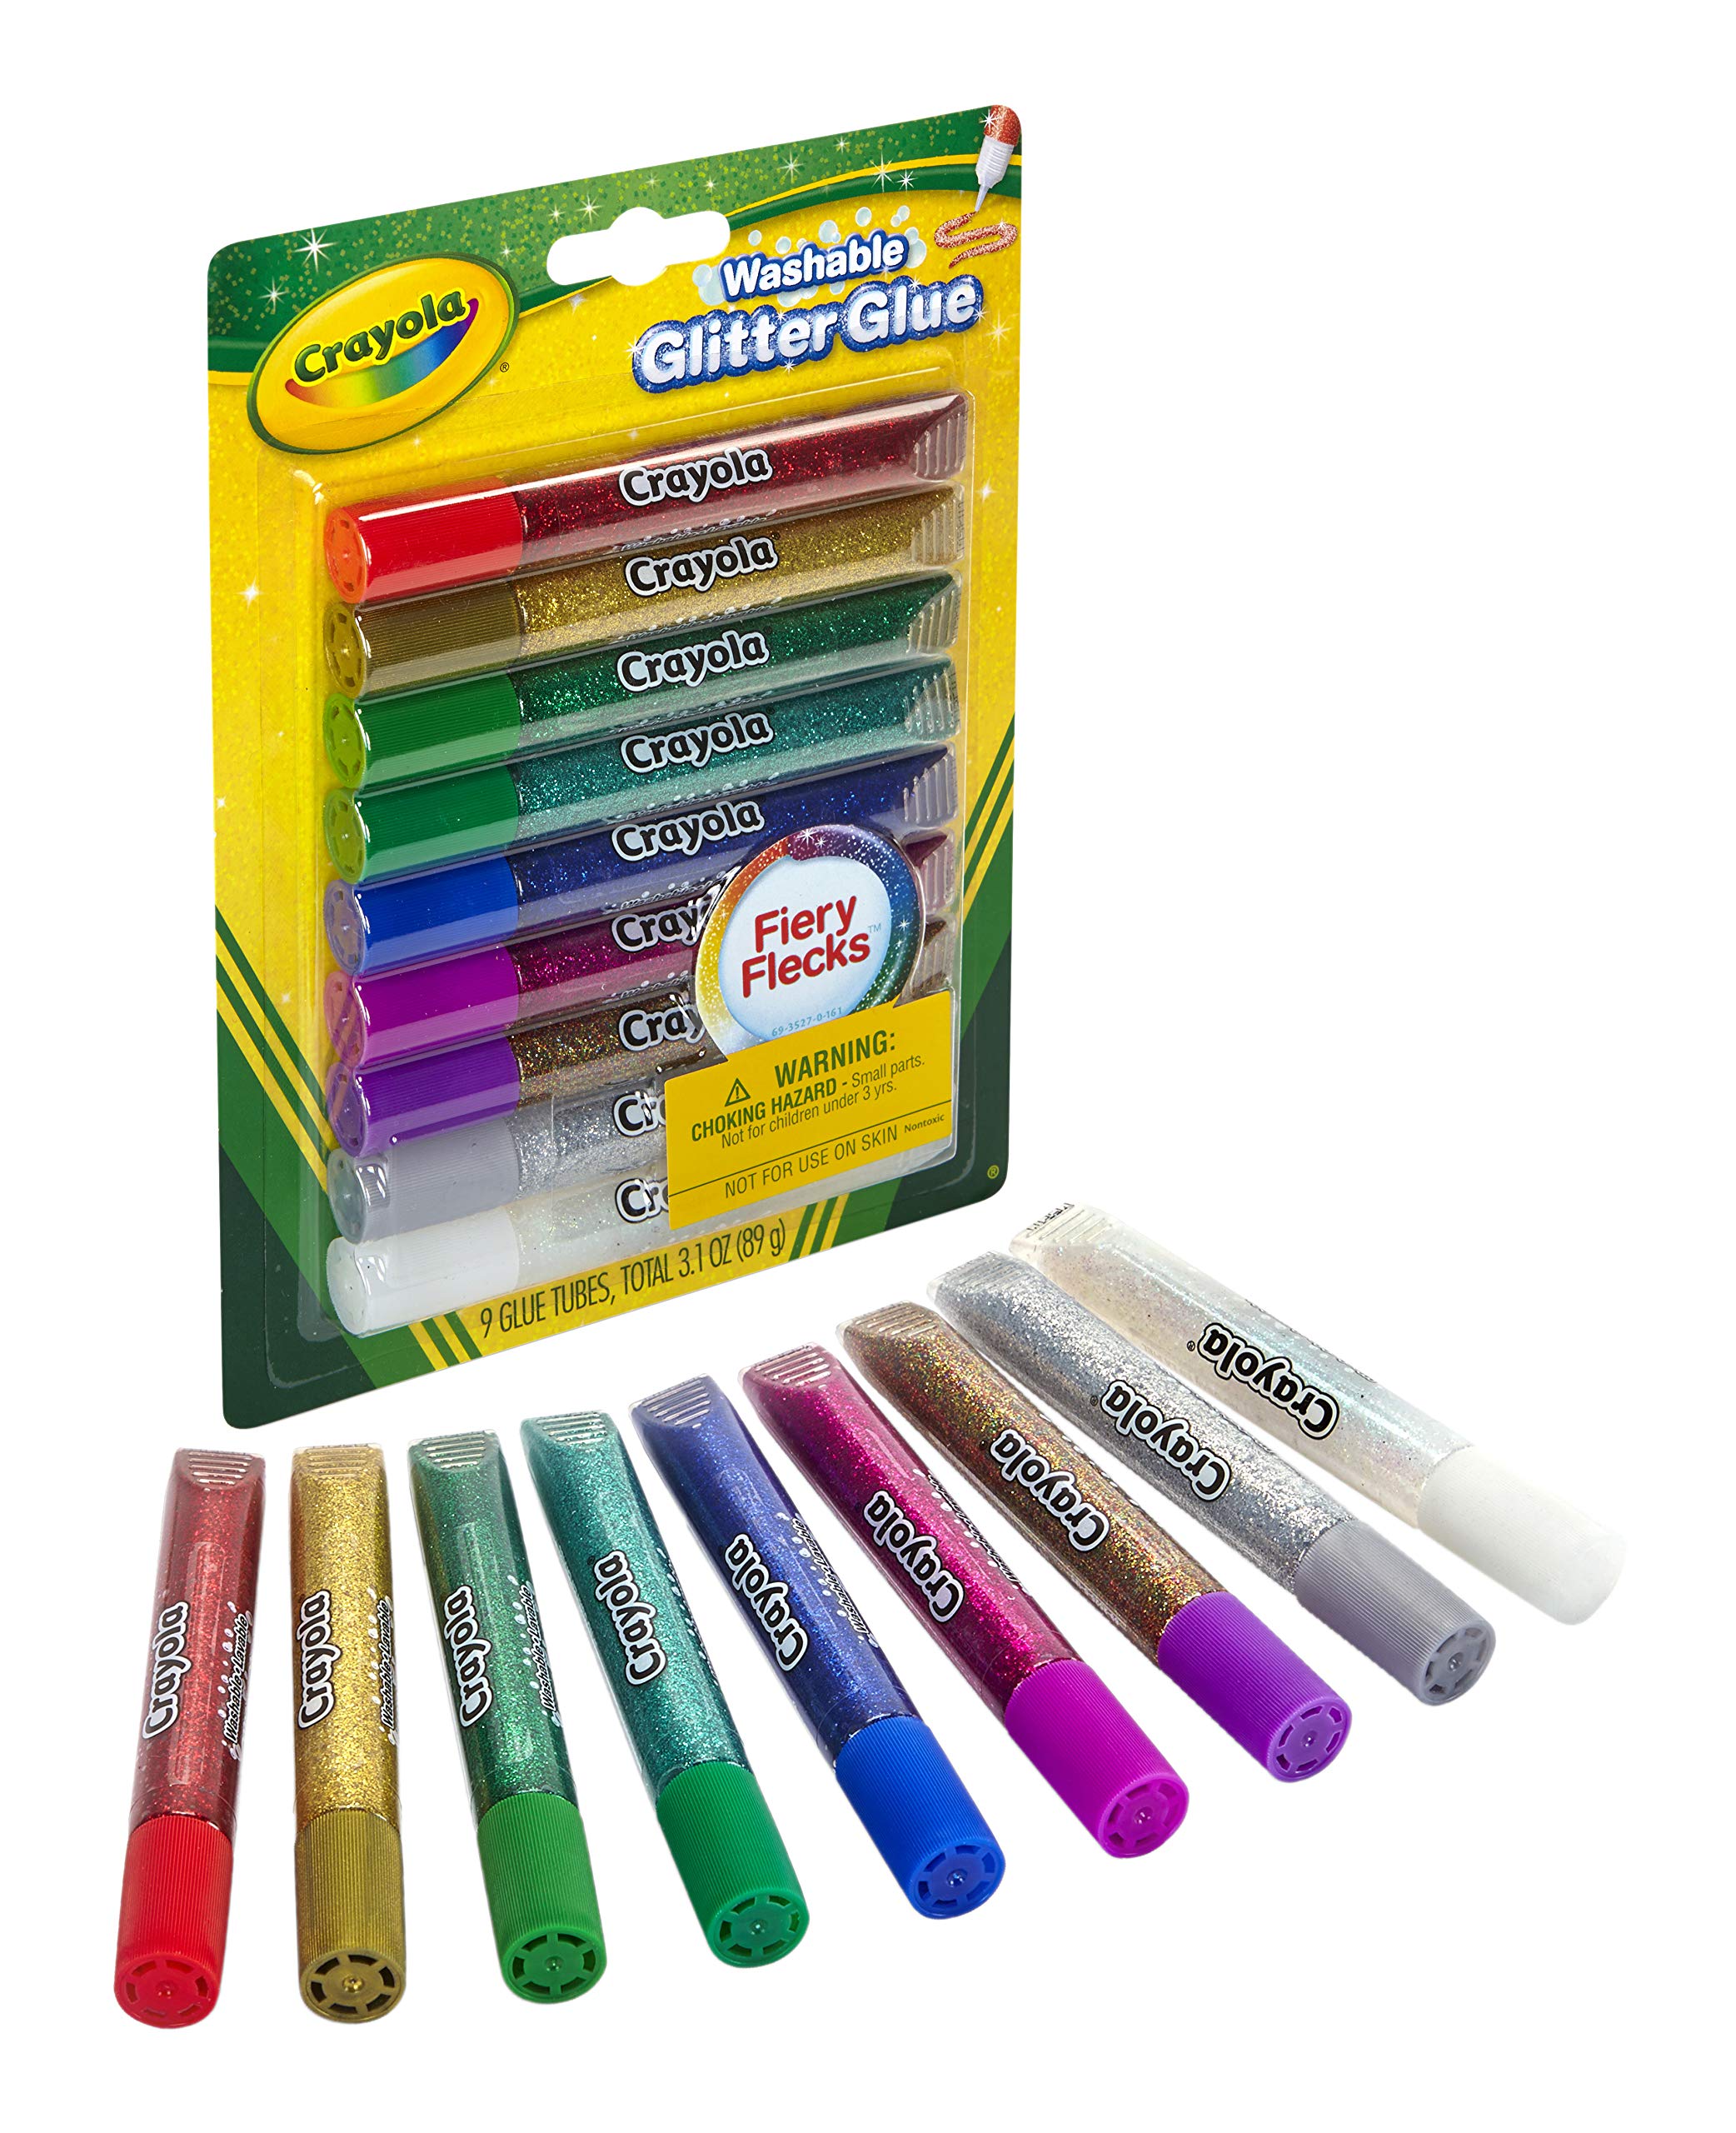 Crayola Washable Glitter Glue - Assorted Colours (Pack of 9) | Add Some Extra Sparkle to Your Arts & Crafts! | Ideal for Kids Aged 3+